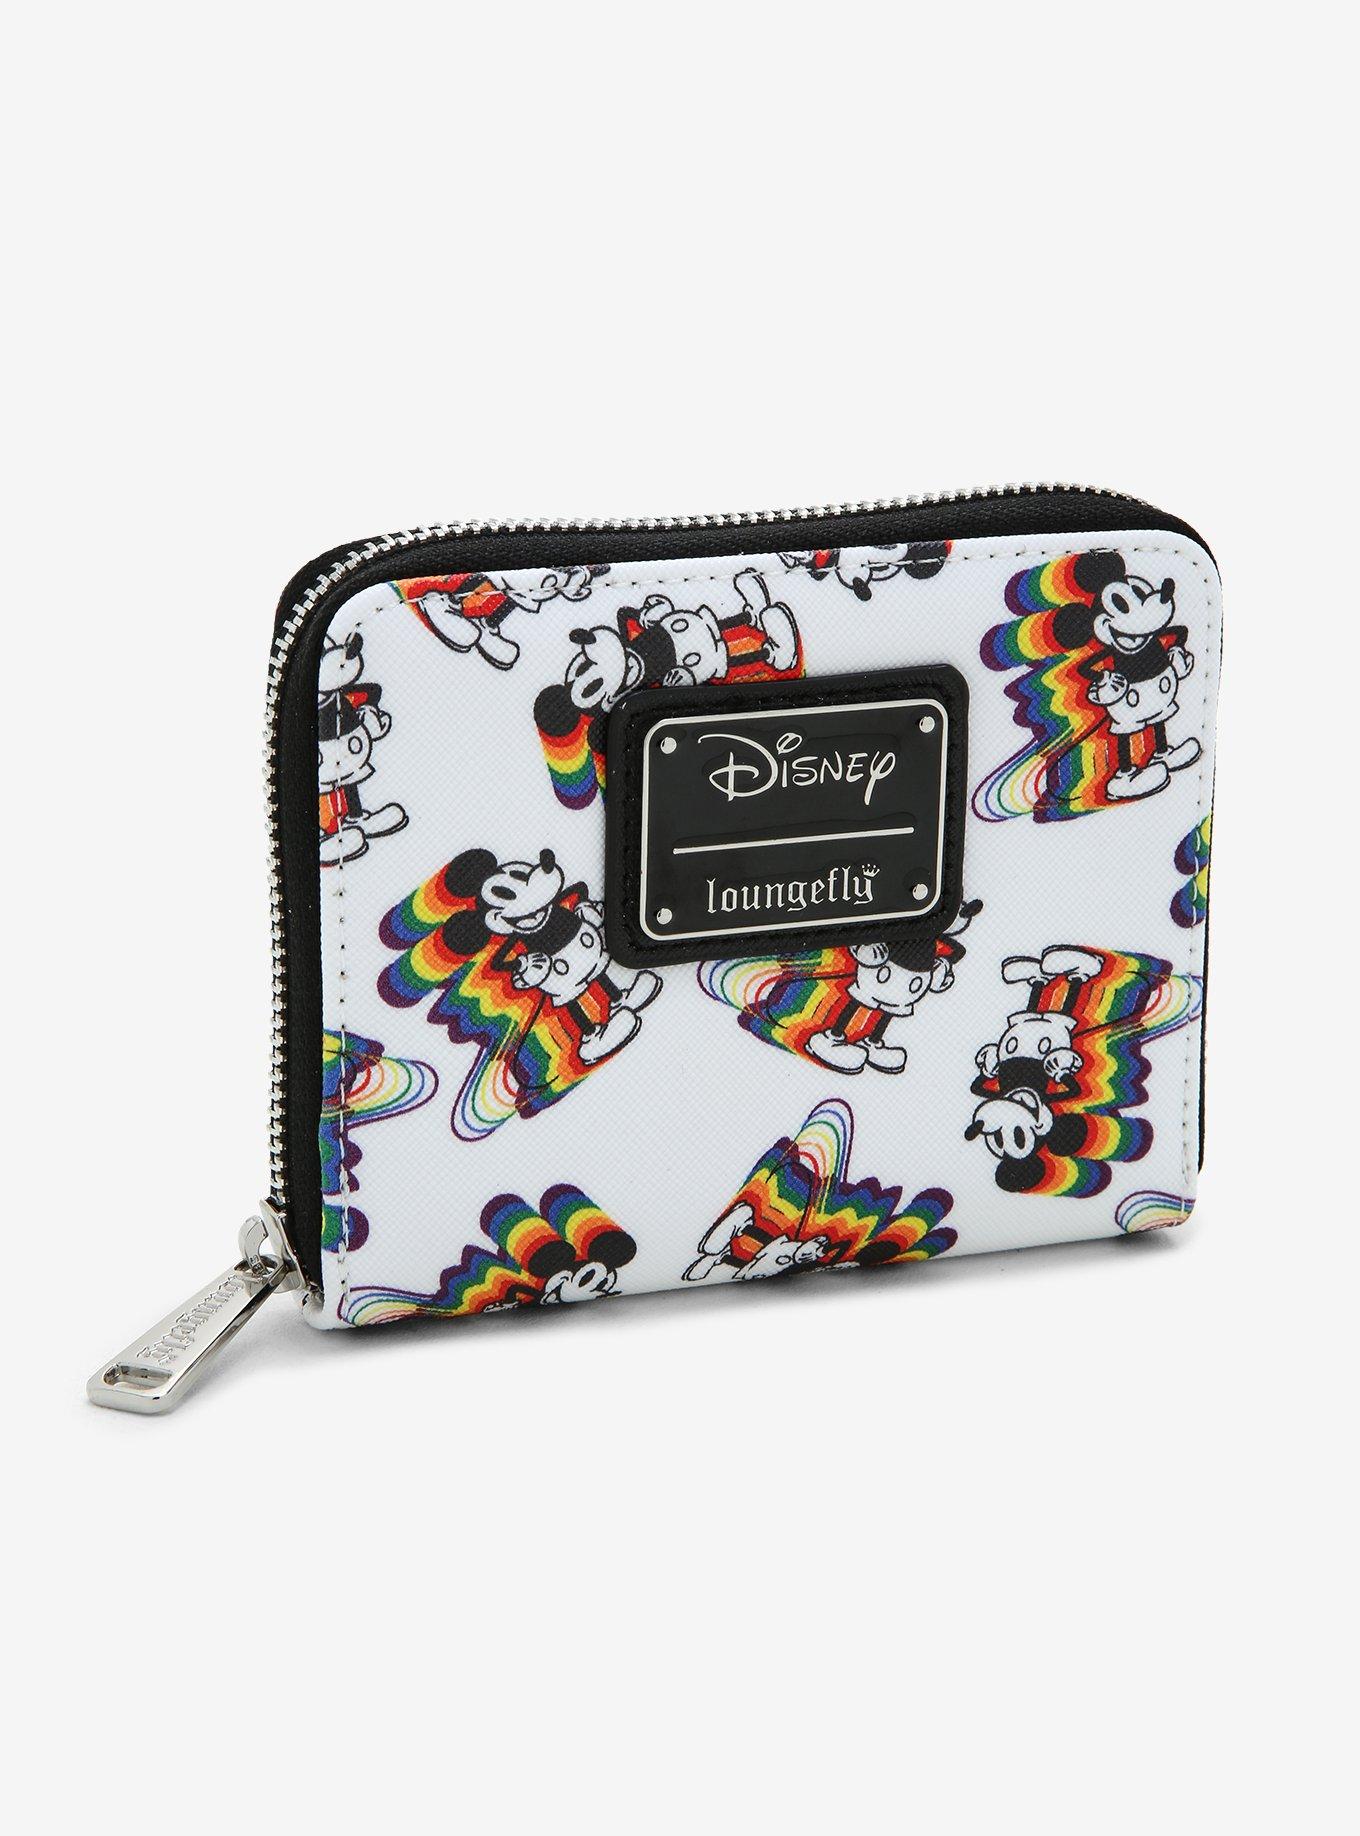 Disney Loungefly Mickey Mouse Minnie Mouse Wallet for Sale in Honolulu, HI  - OfferUp